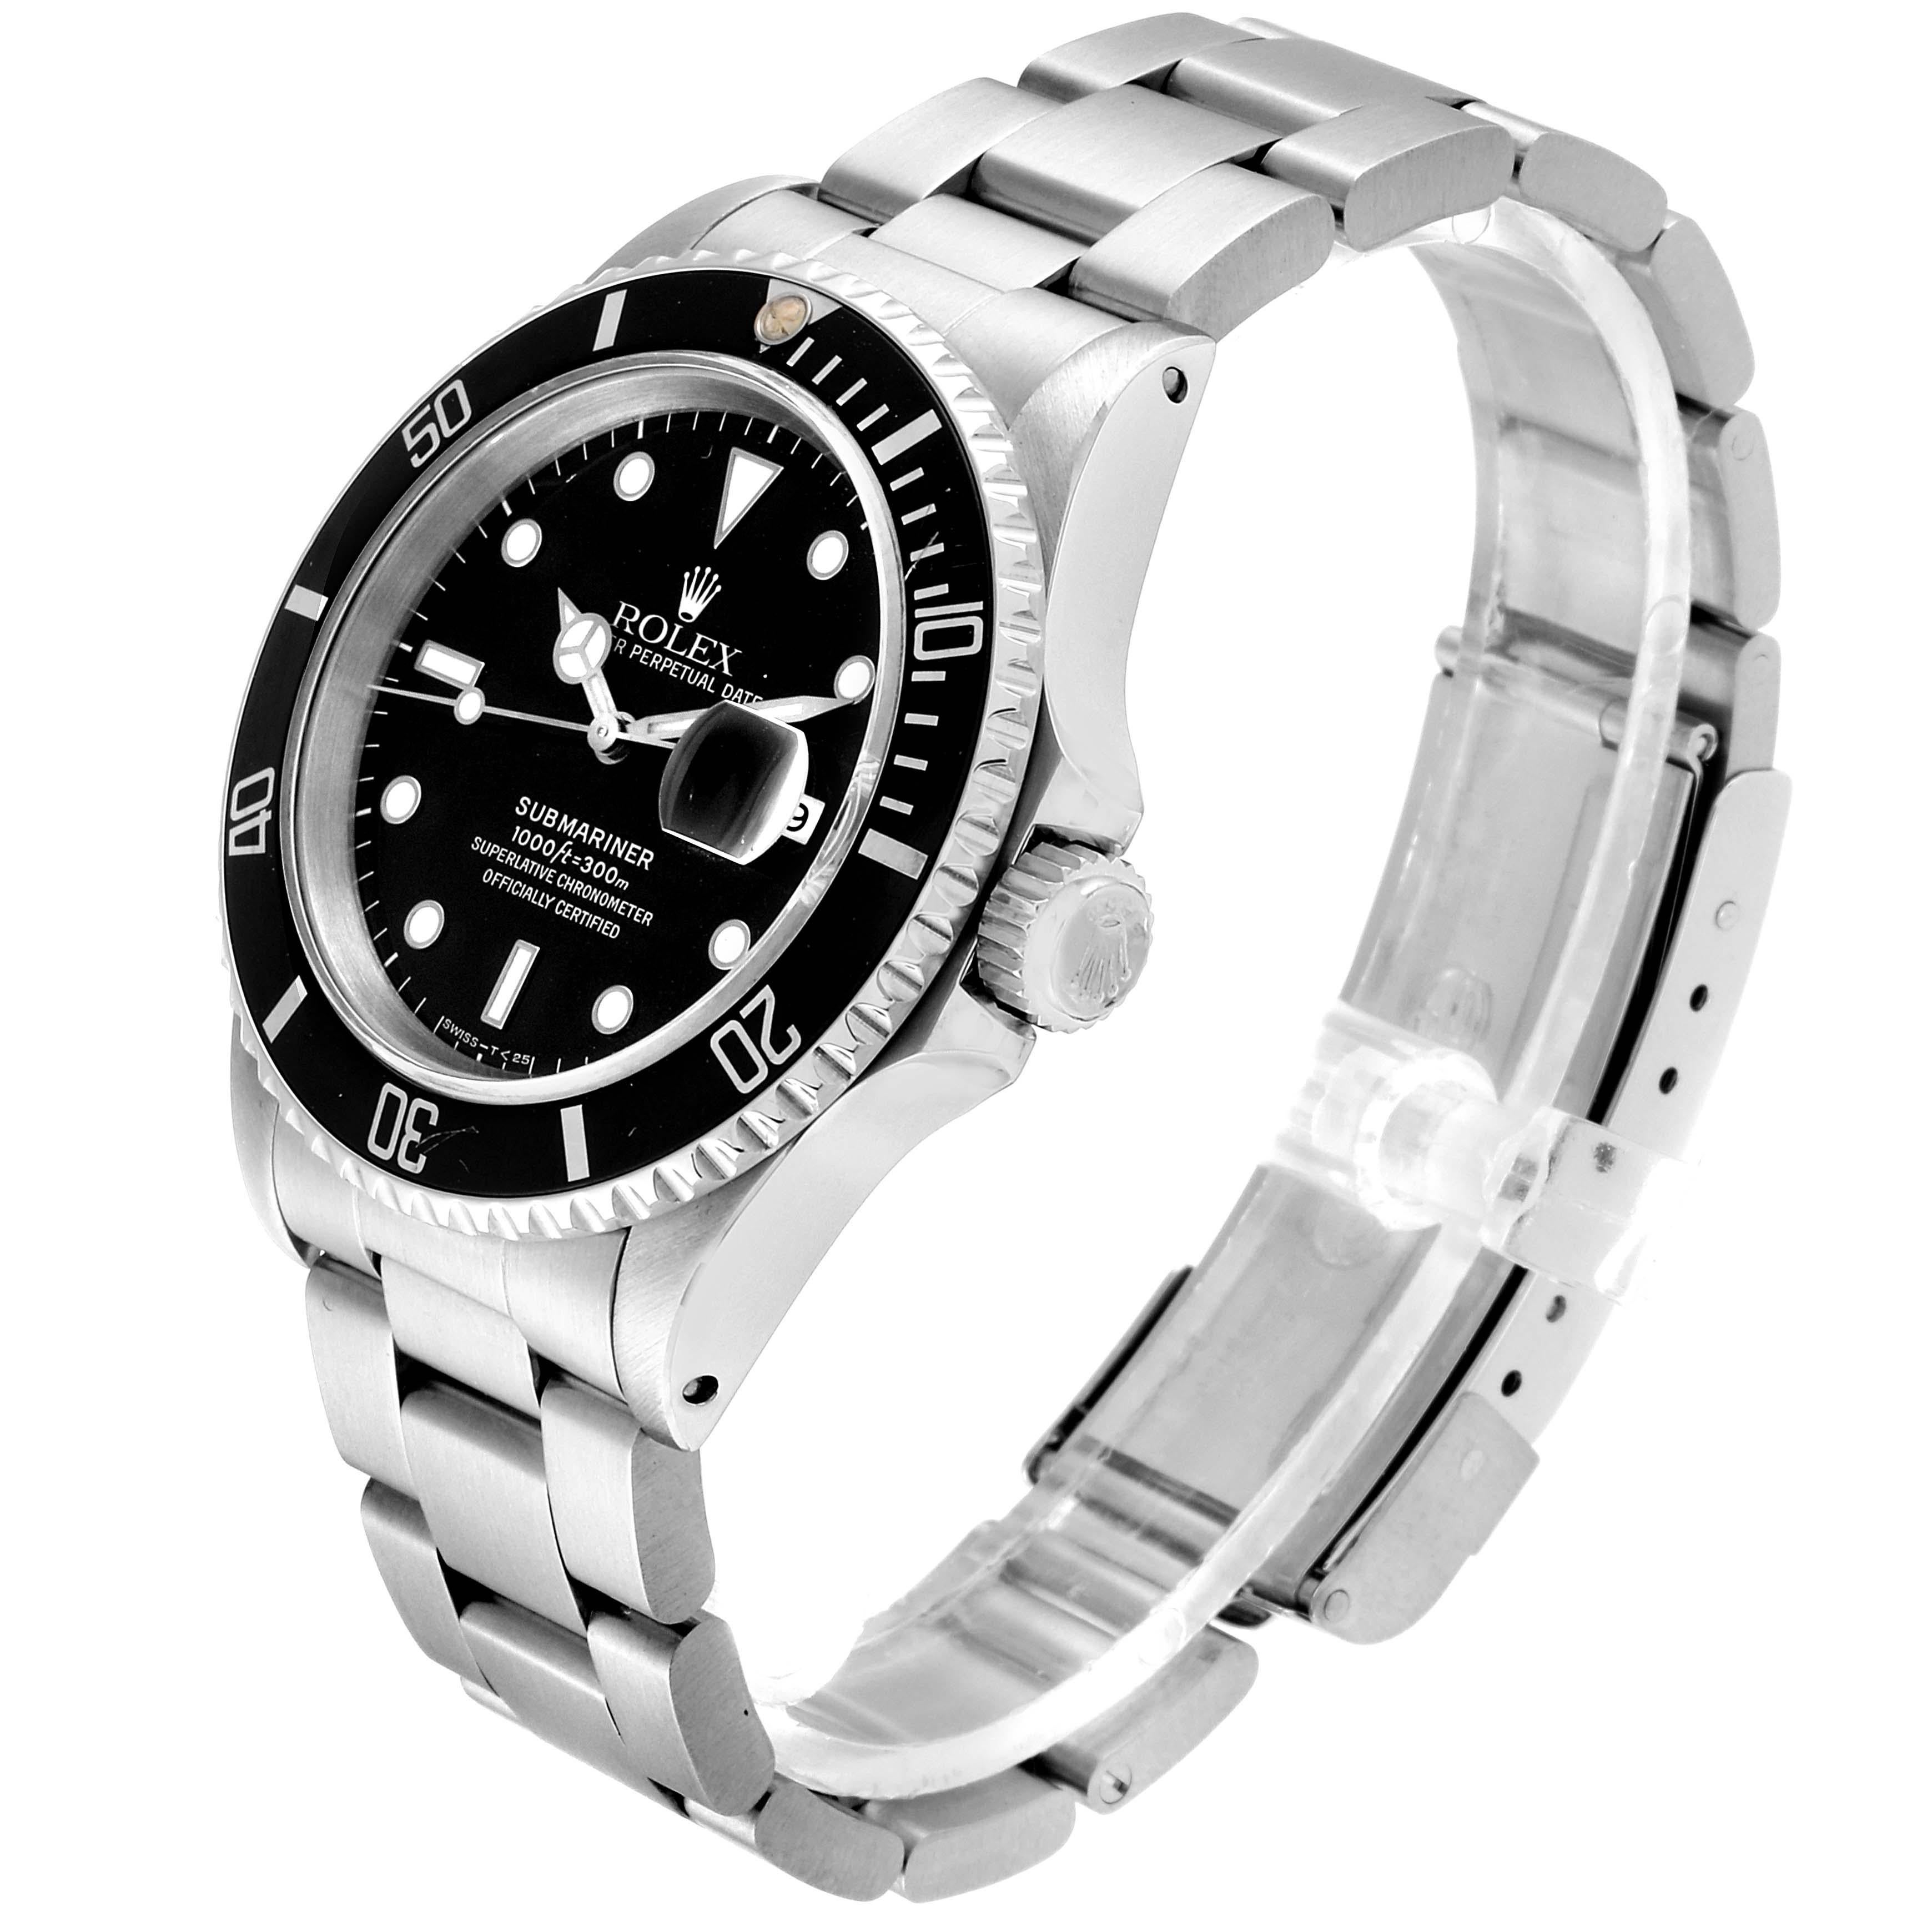 Rolex Submariner Black Dial Stainless Steel Men's Watch 16610 For Sale 1